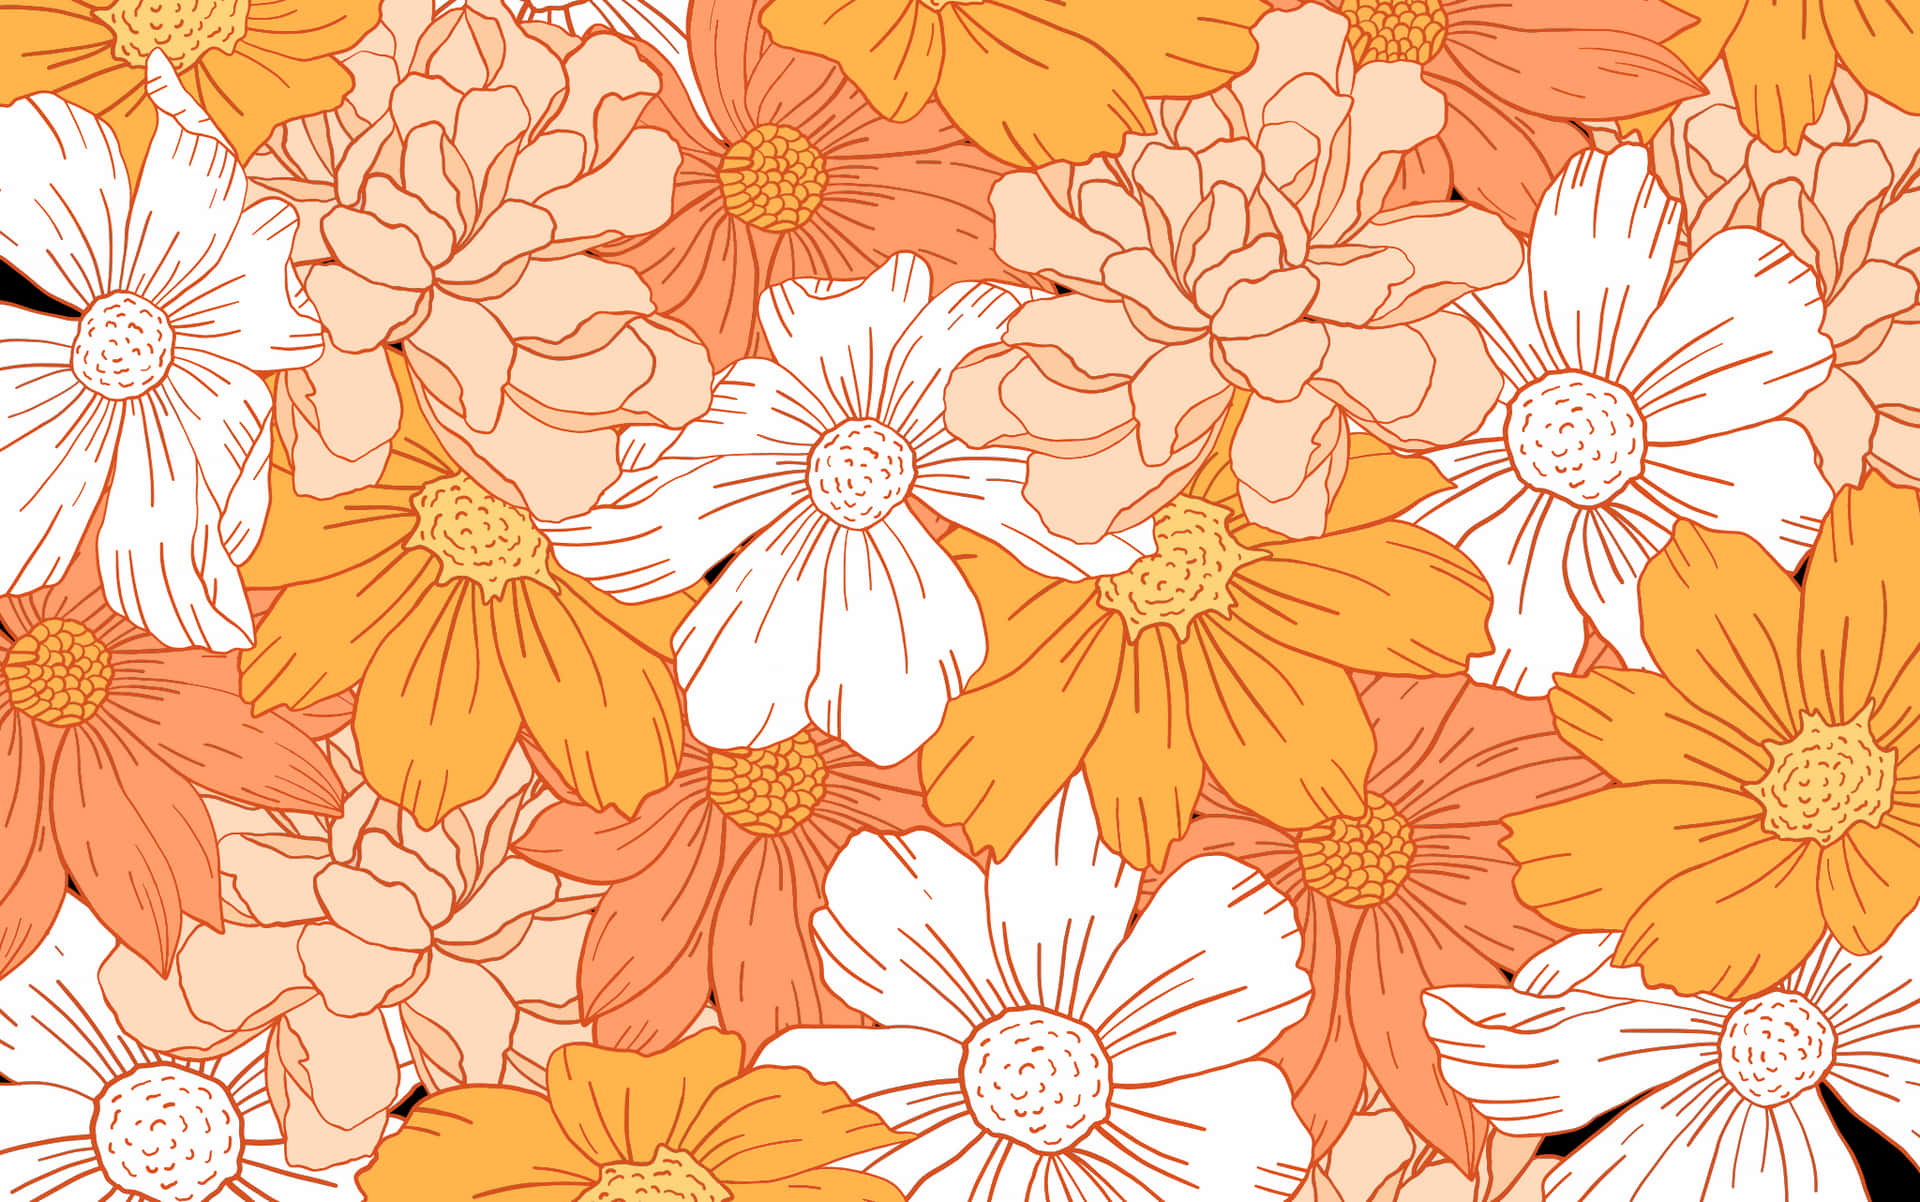 A Kawaii Flower Blooming Vibrantly in High Resolution Wallpaper